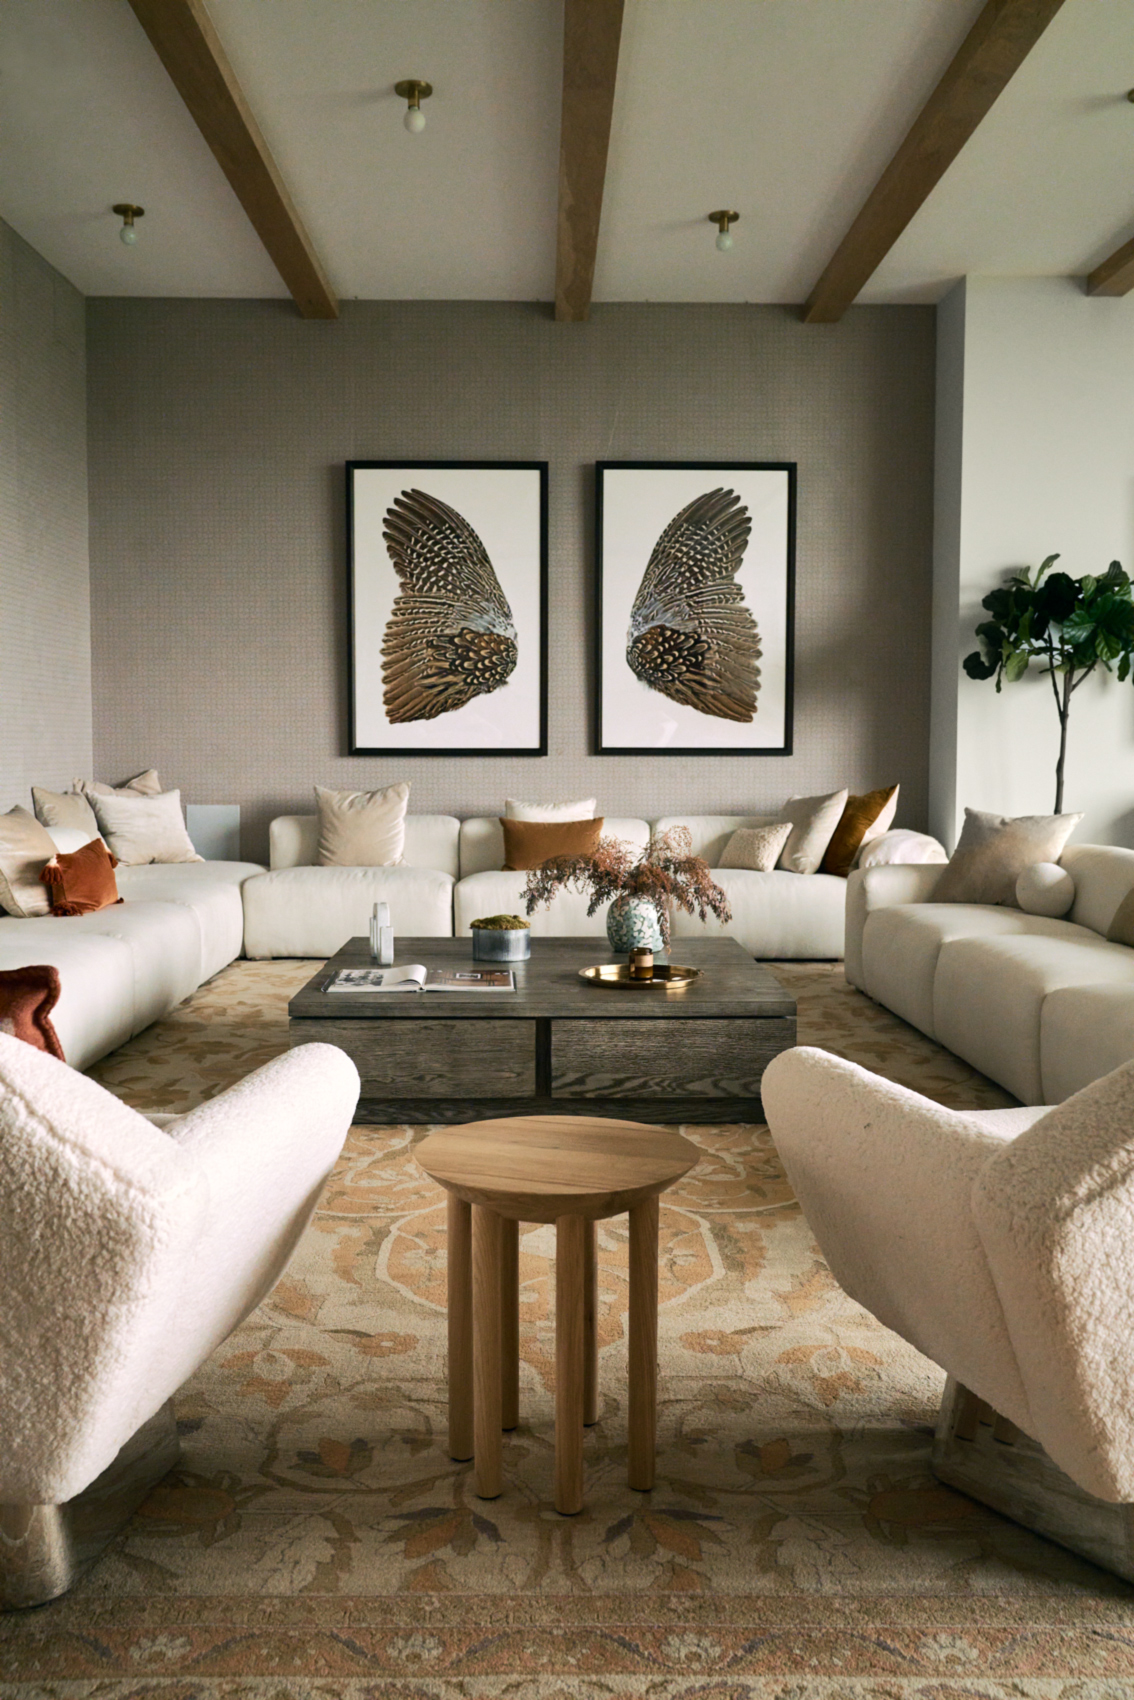 symmetrical wing prints on the wall of a home in the pacific palisades